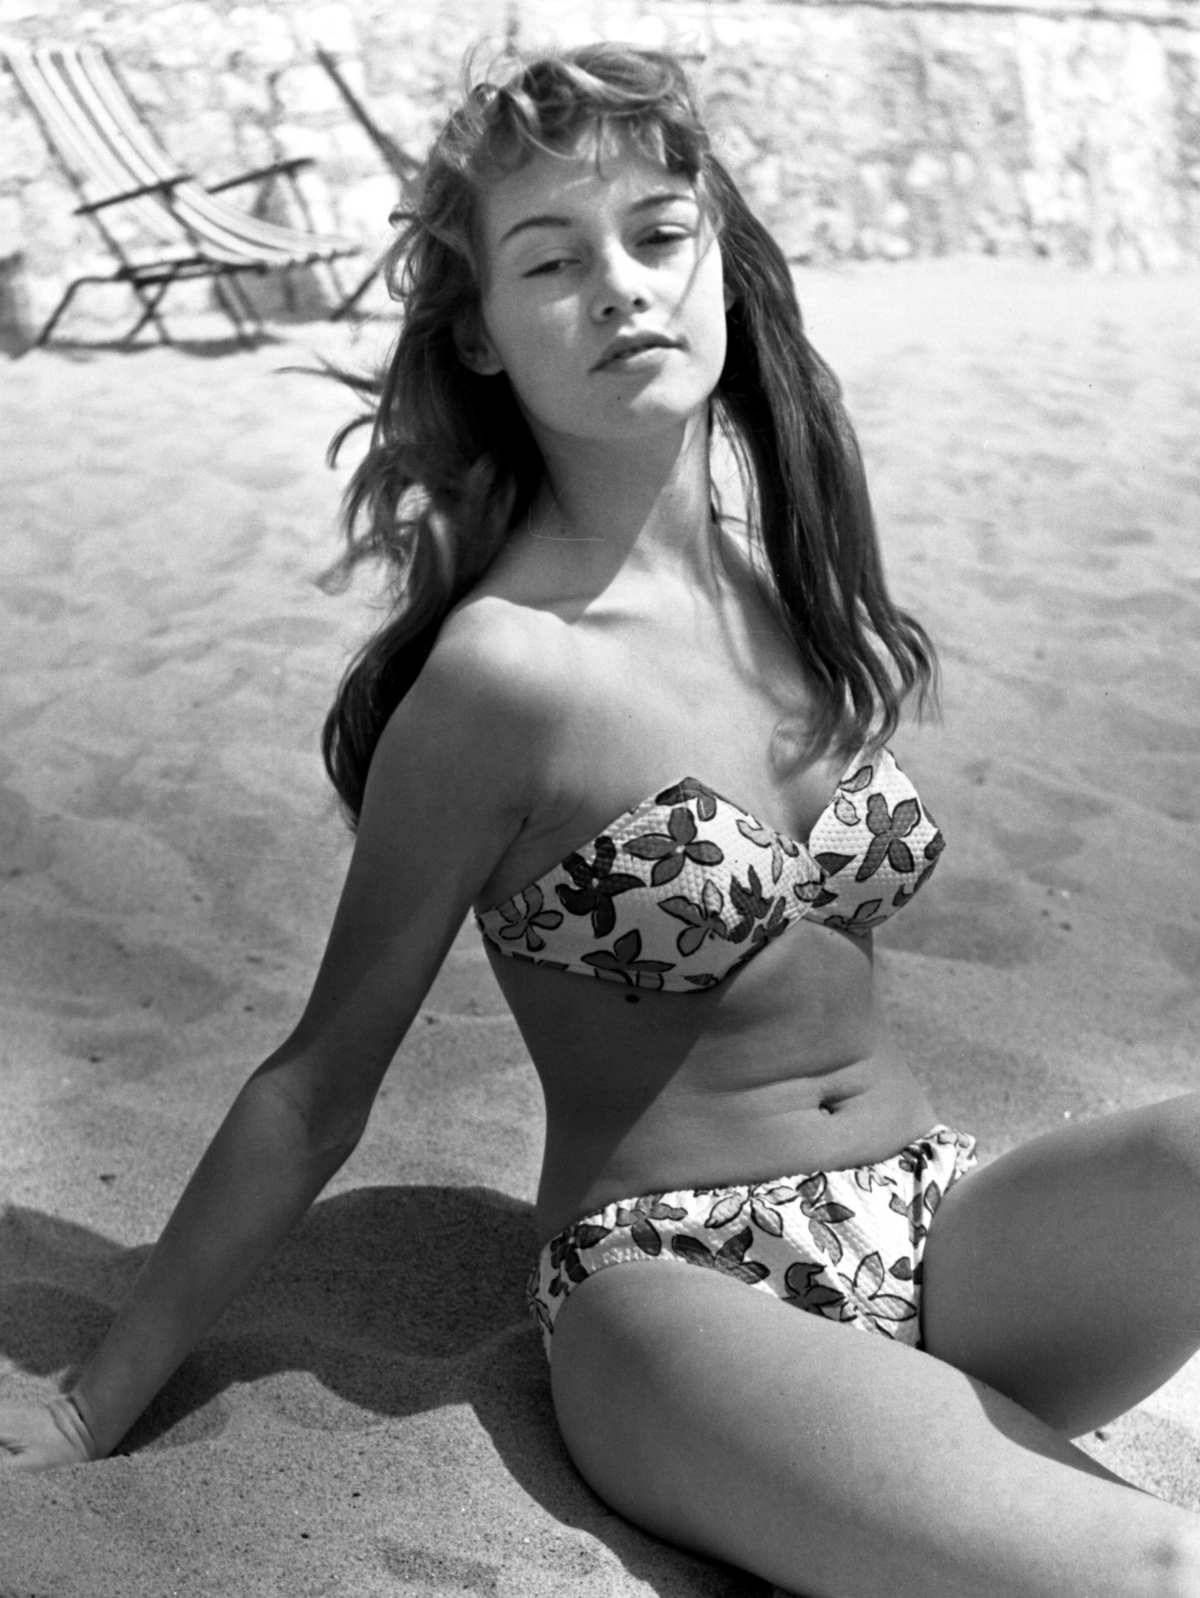 Stunning Photos of 19-Year-Old Brigitte Bardot Donned a Floral Bikini While Lounging on the Beach at the 1953 Cannes Film Festival ~ Vintage Everyday